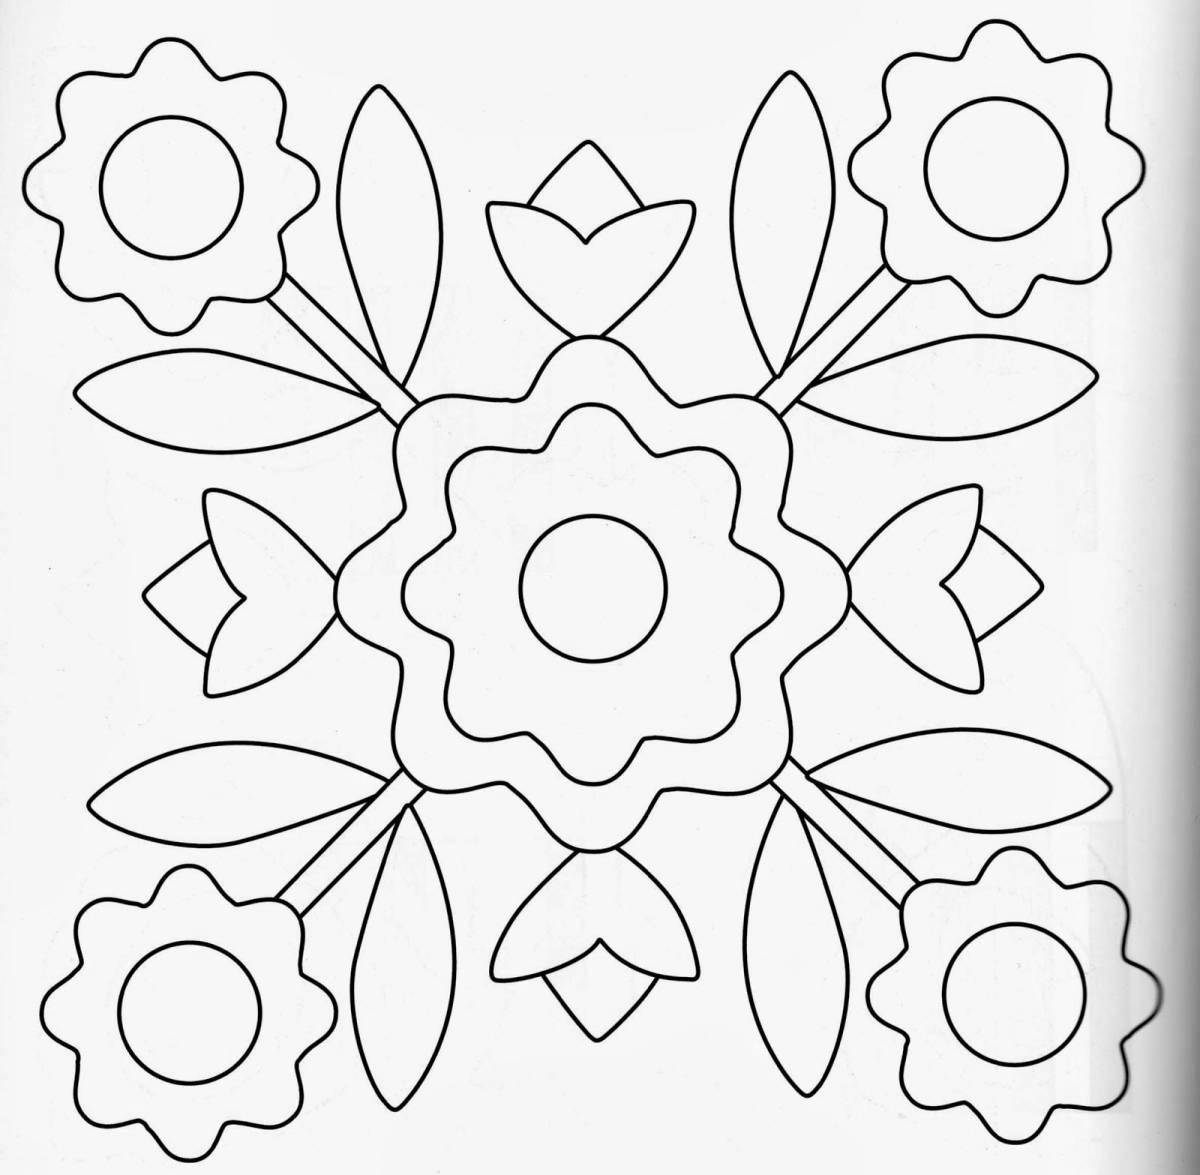 Adorable scarf coloring book for kids